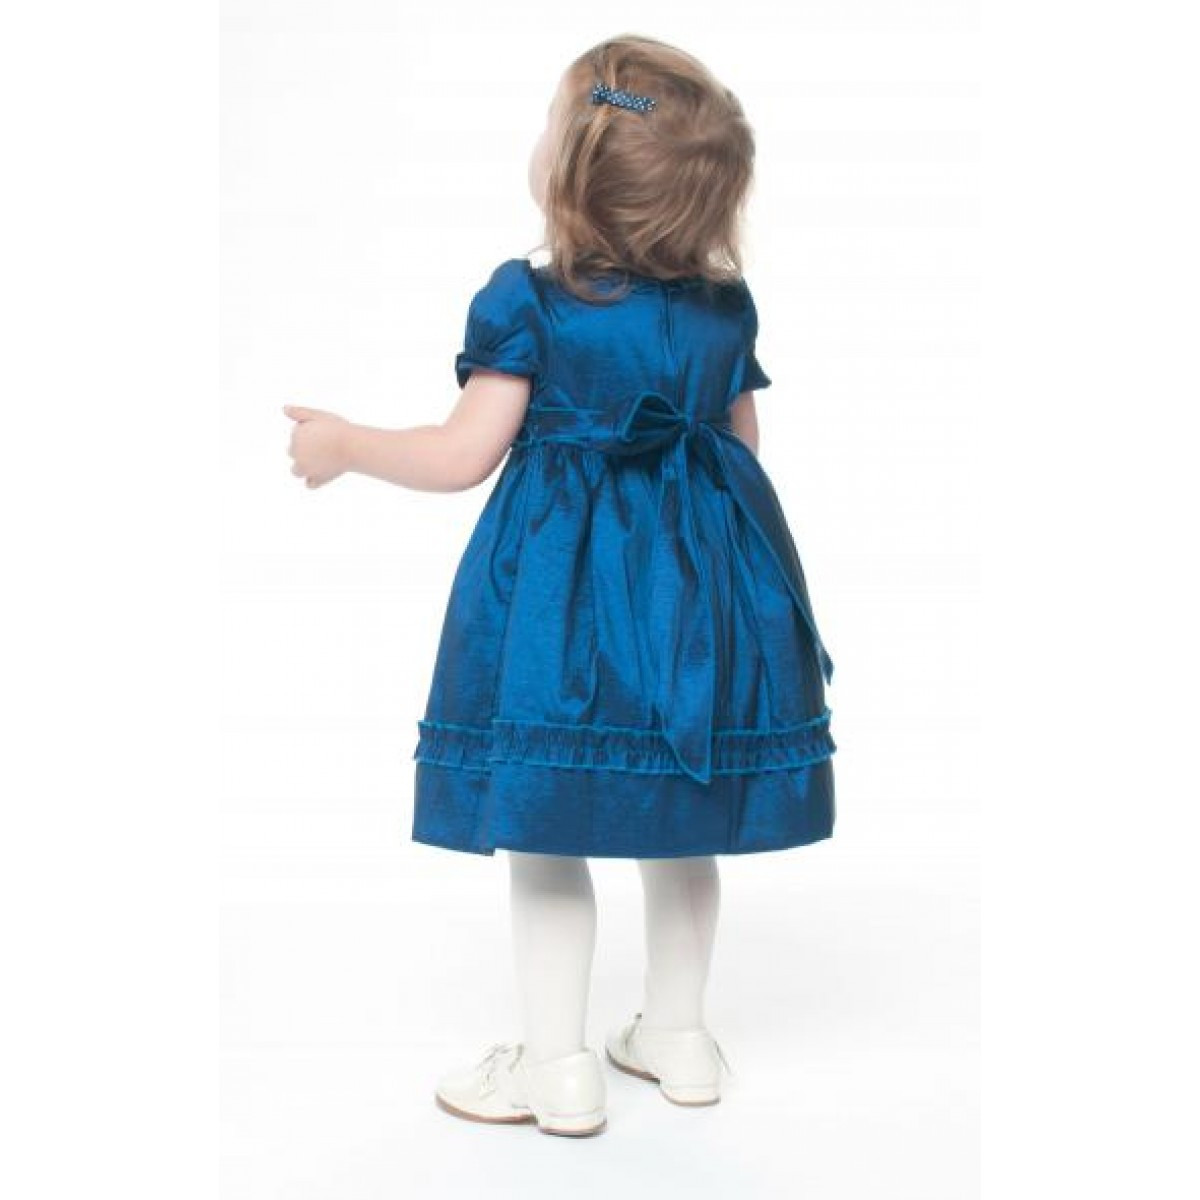 Baby Blue Party Dresses
 Blue taffeta baby party dress 12 18m only